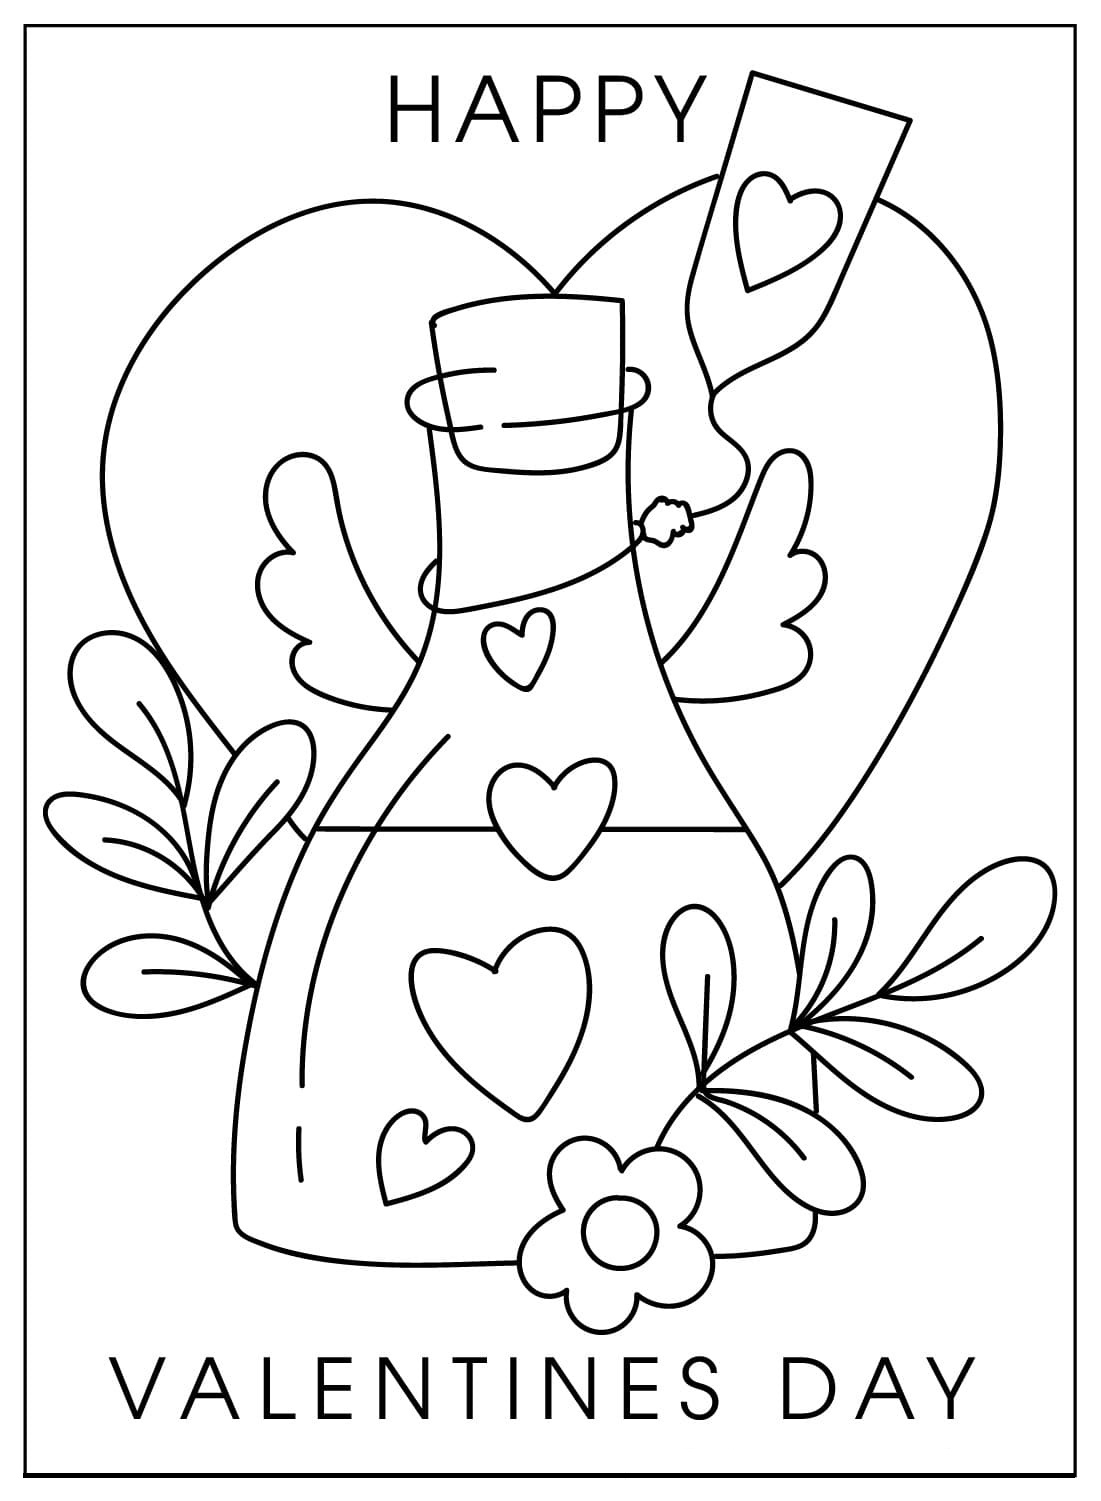 Valentines Day Cards Coloring Page Free Printable